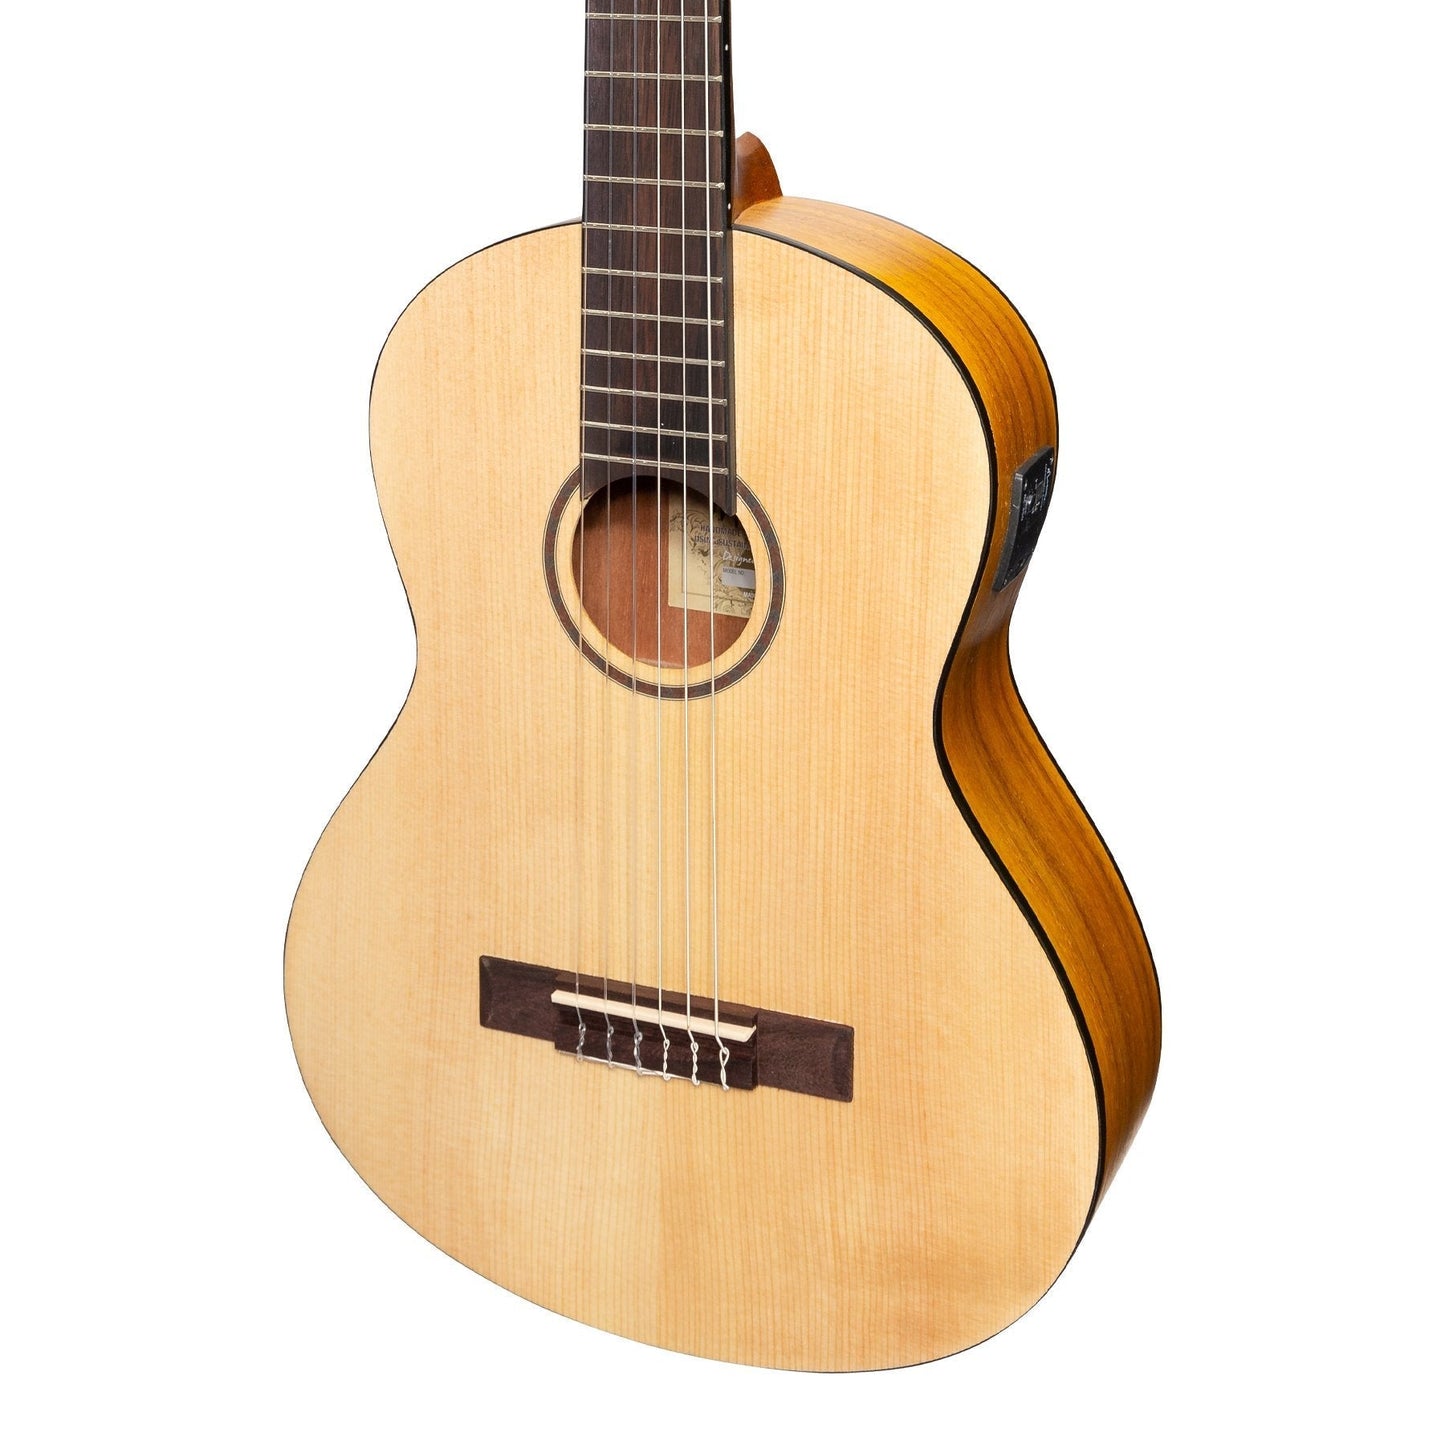 Martinez Left Handed 3/4 Size Student Classical Guitar Pack with Built In Tuner (Spruce/Koa)